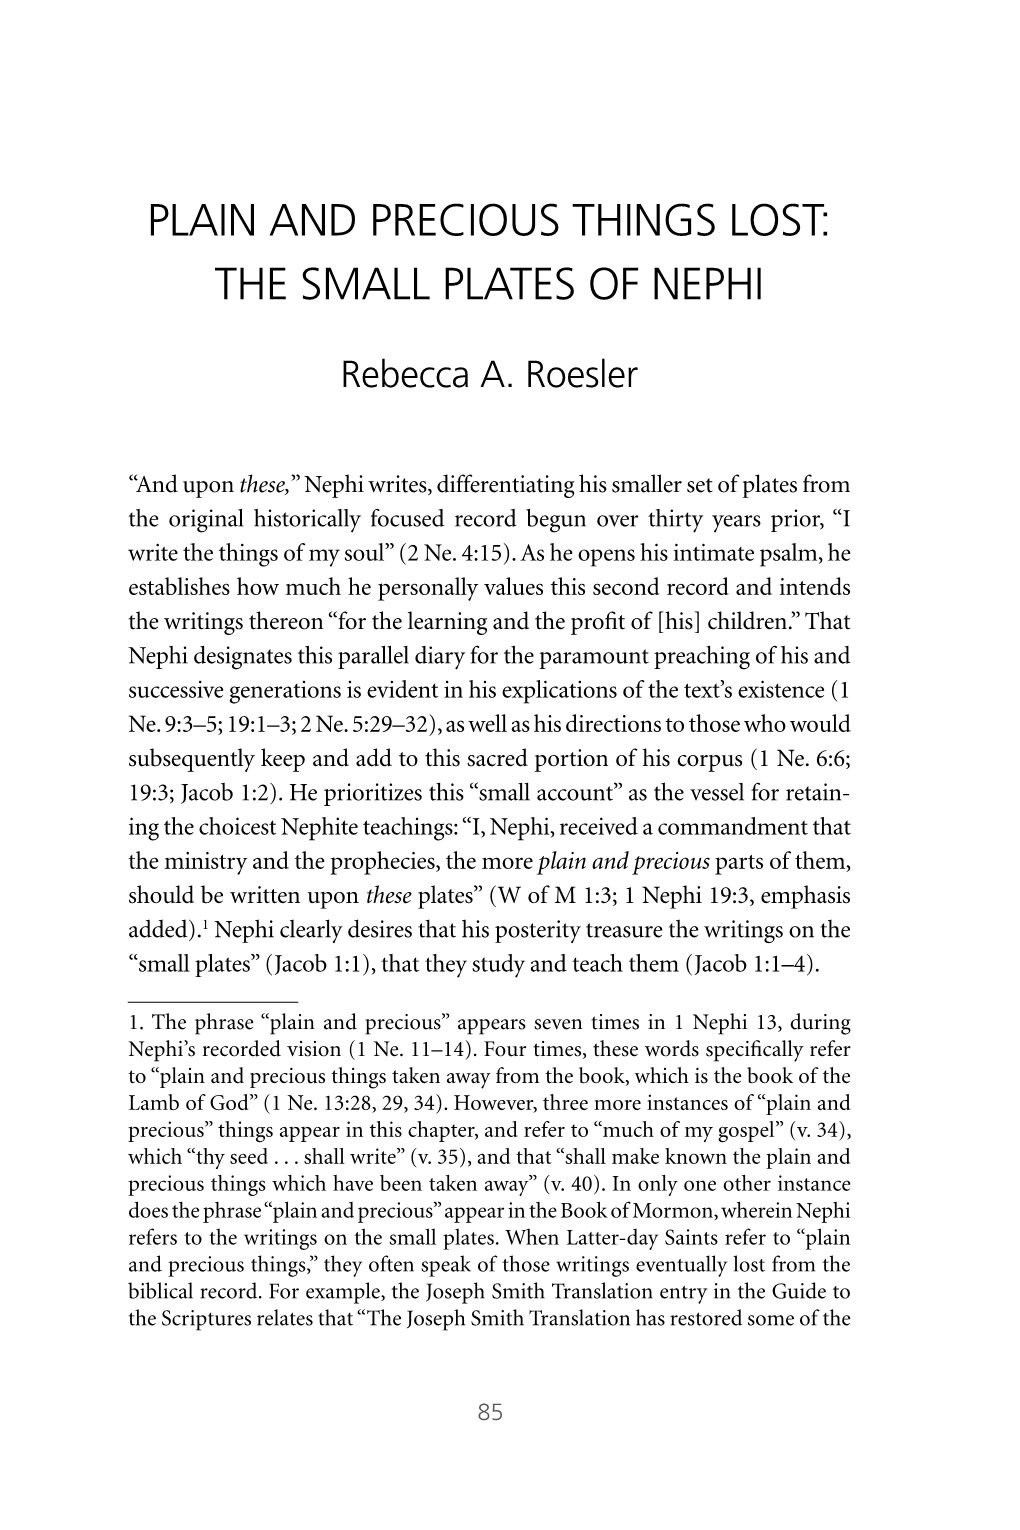 Plain and Precious Things Lost: the Small Plates of Nephi